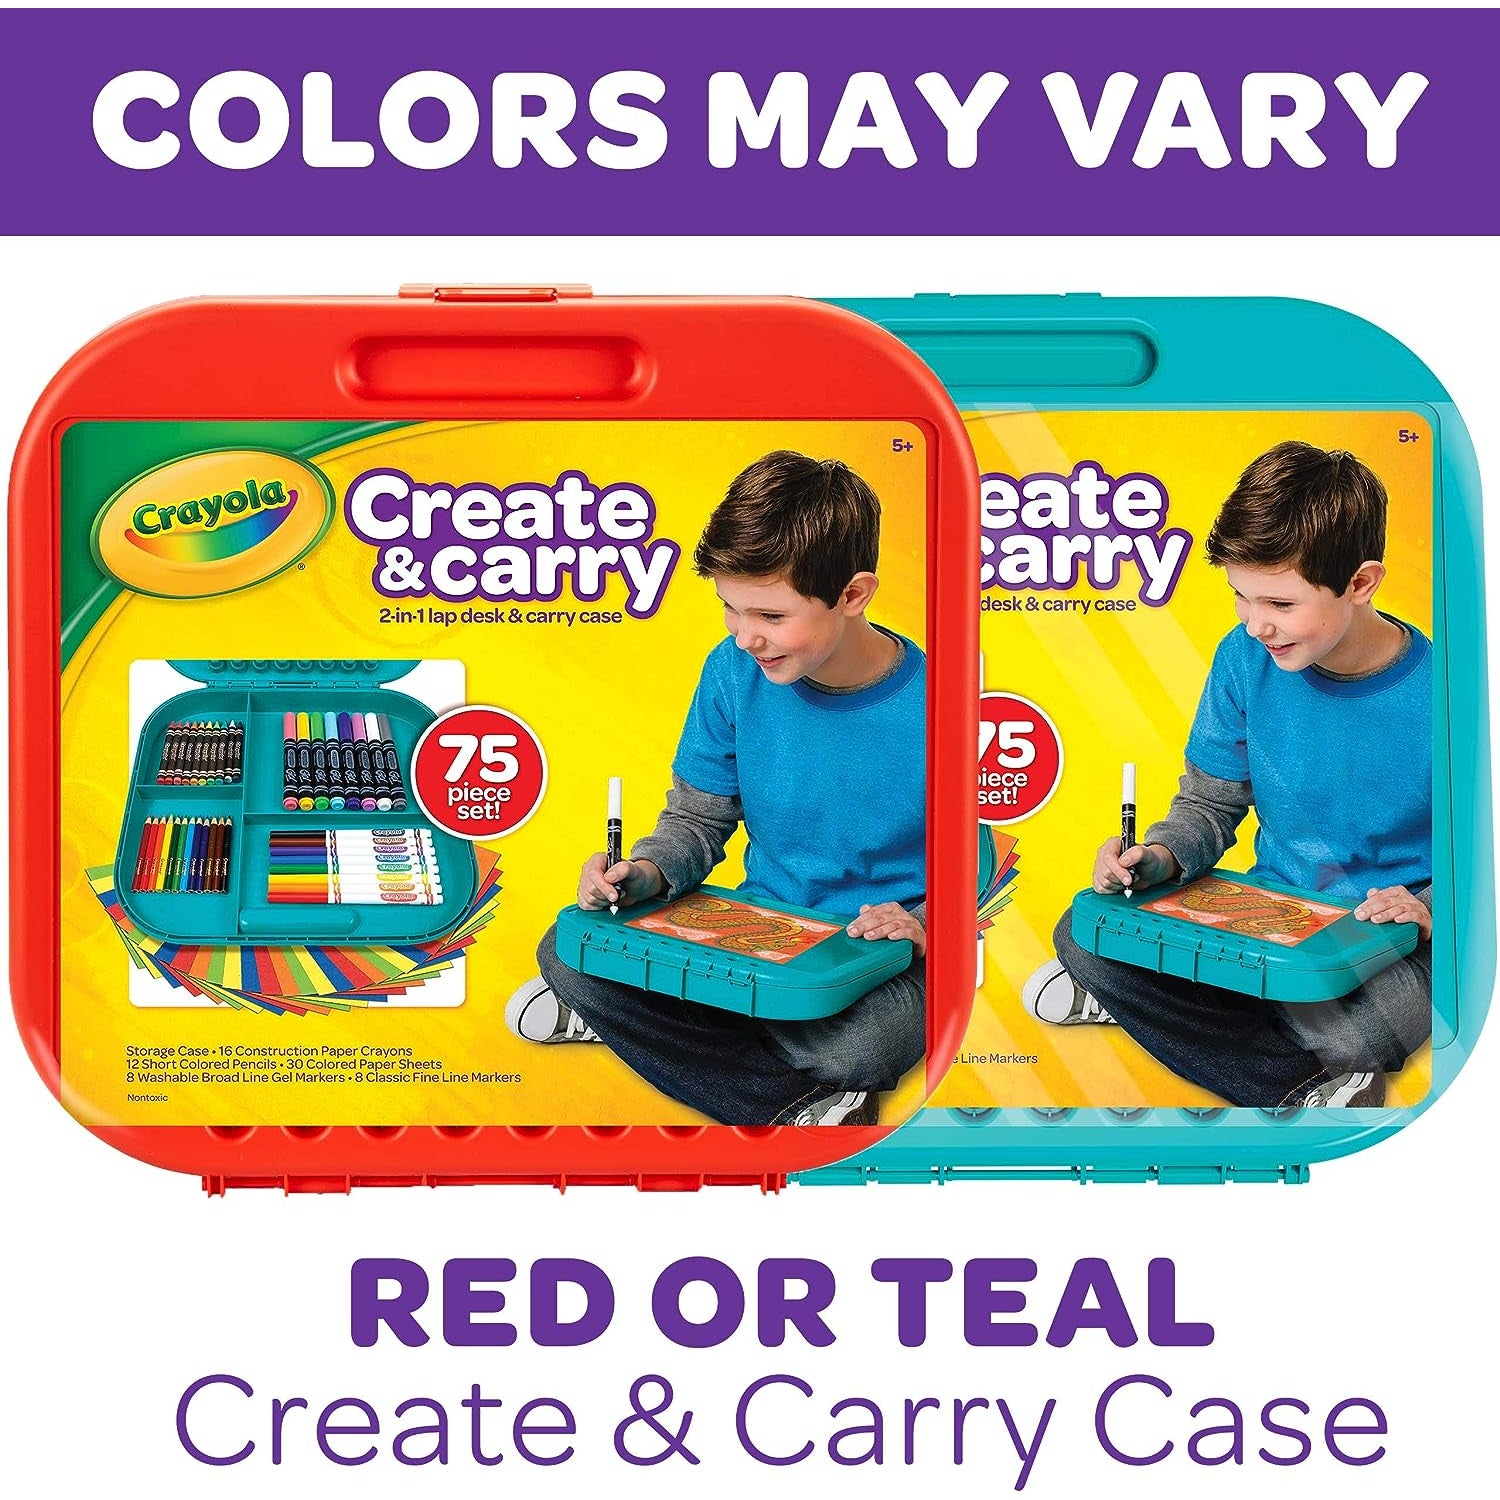 Crayola All That Glitters Art Case Coloring Set, Toys, Gift for Kids Age 5+